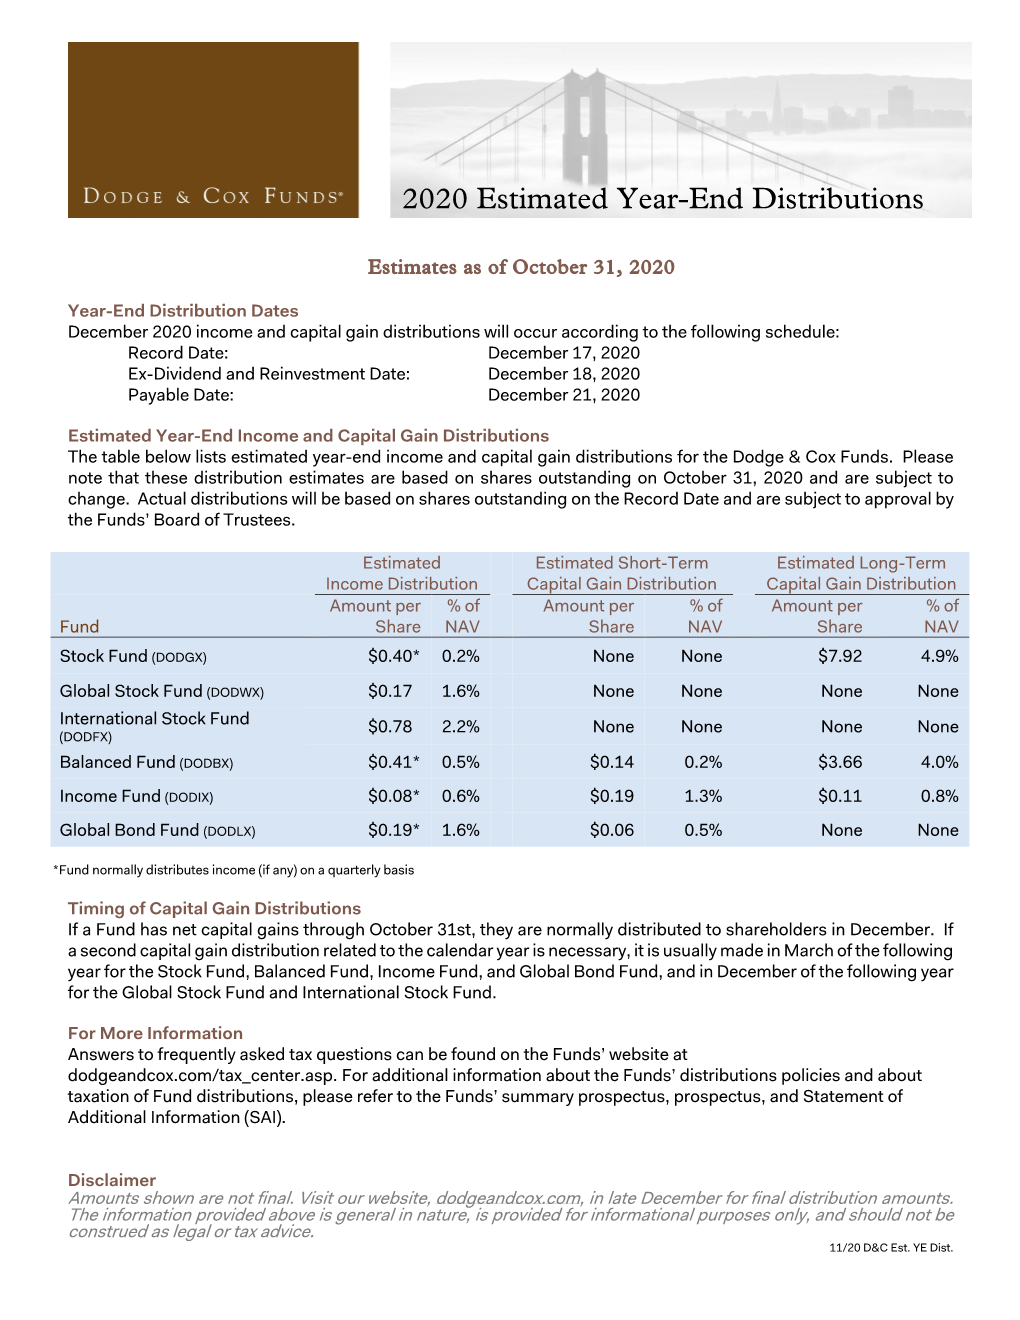 Dodge & Cox Funds 2020 Estimated Year-End Distributions